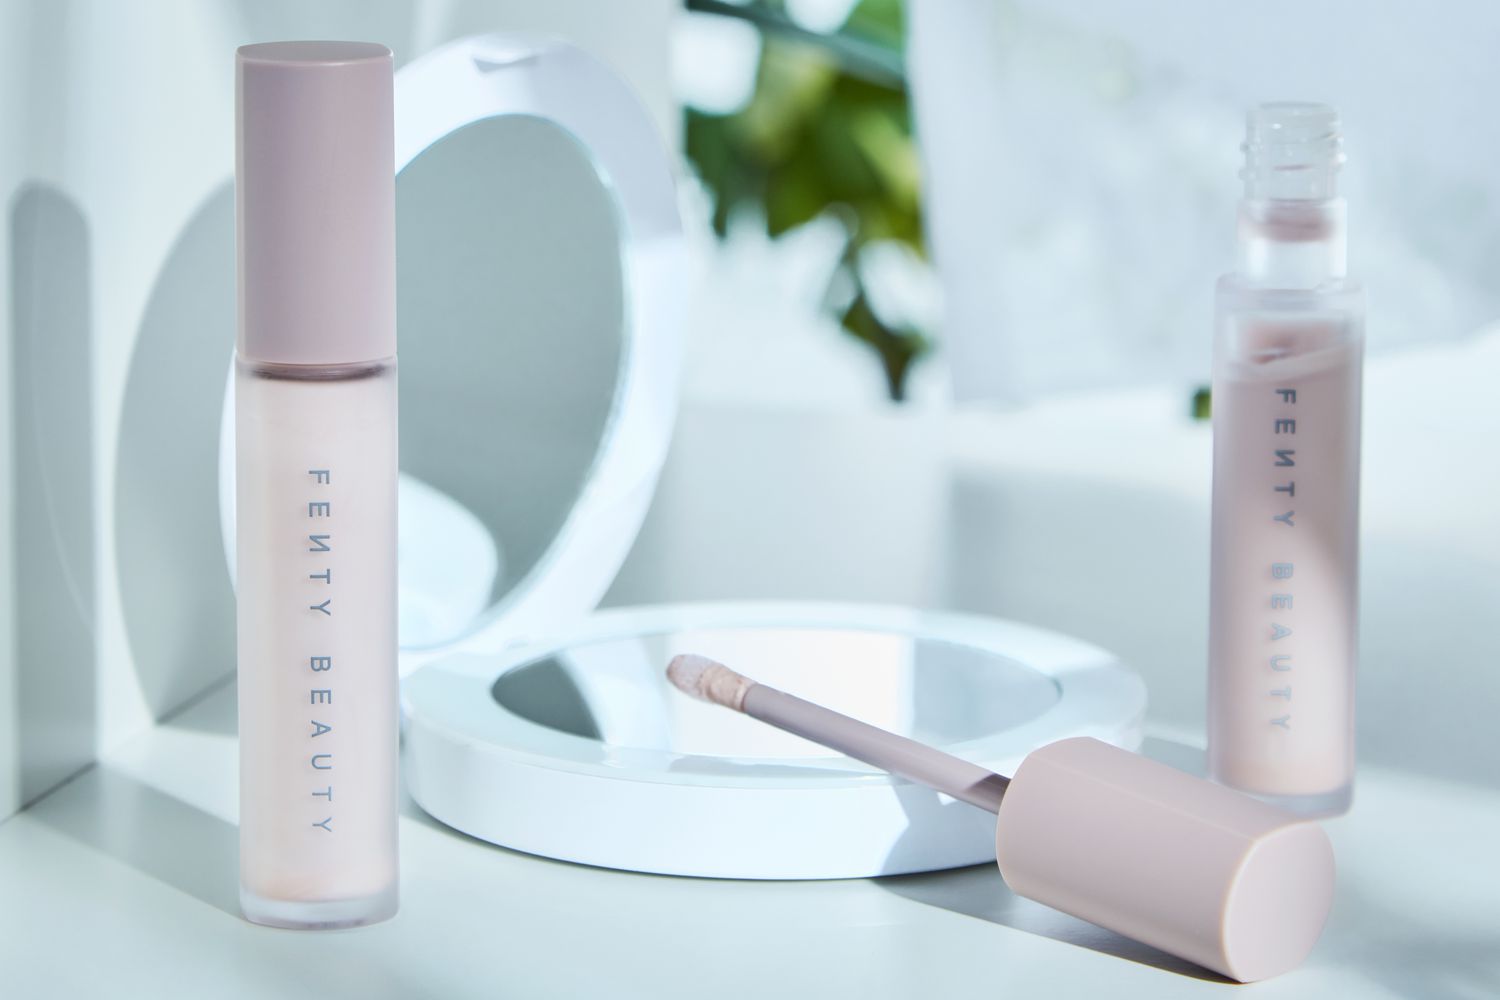 Two bottles of Fenty Beauty Pro Filt'r Amplifying Eye Primer displayed on a white surface next to a compact mirror